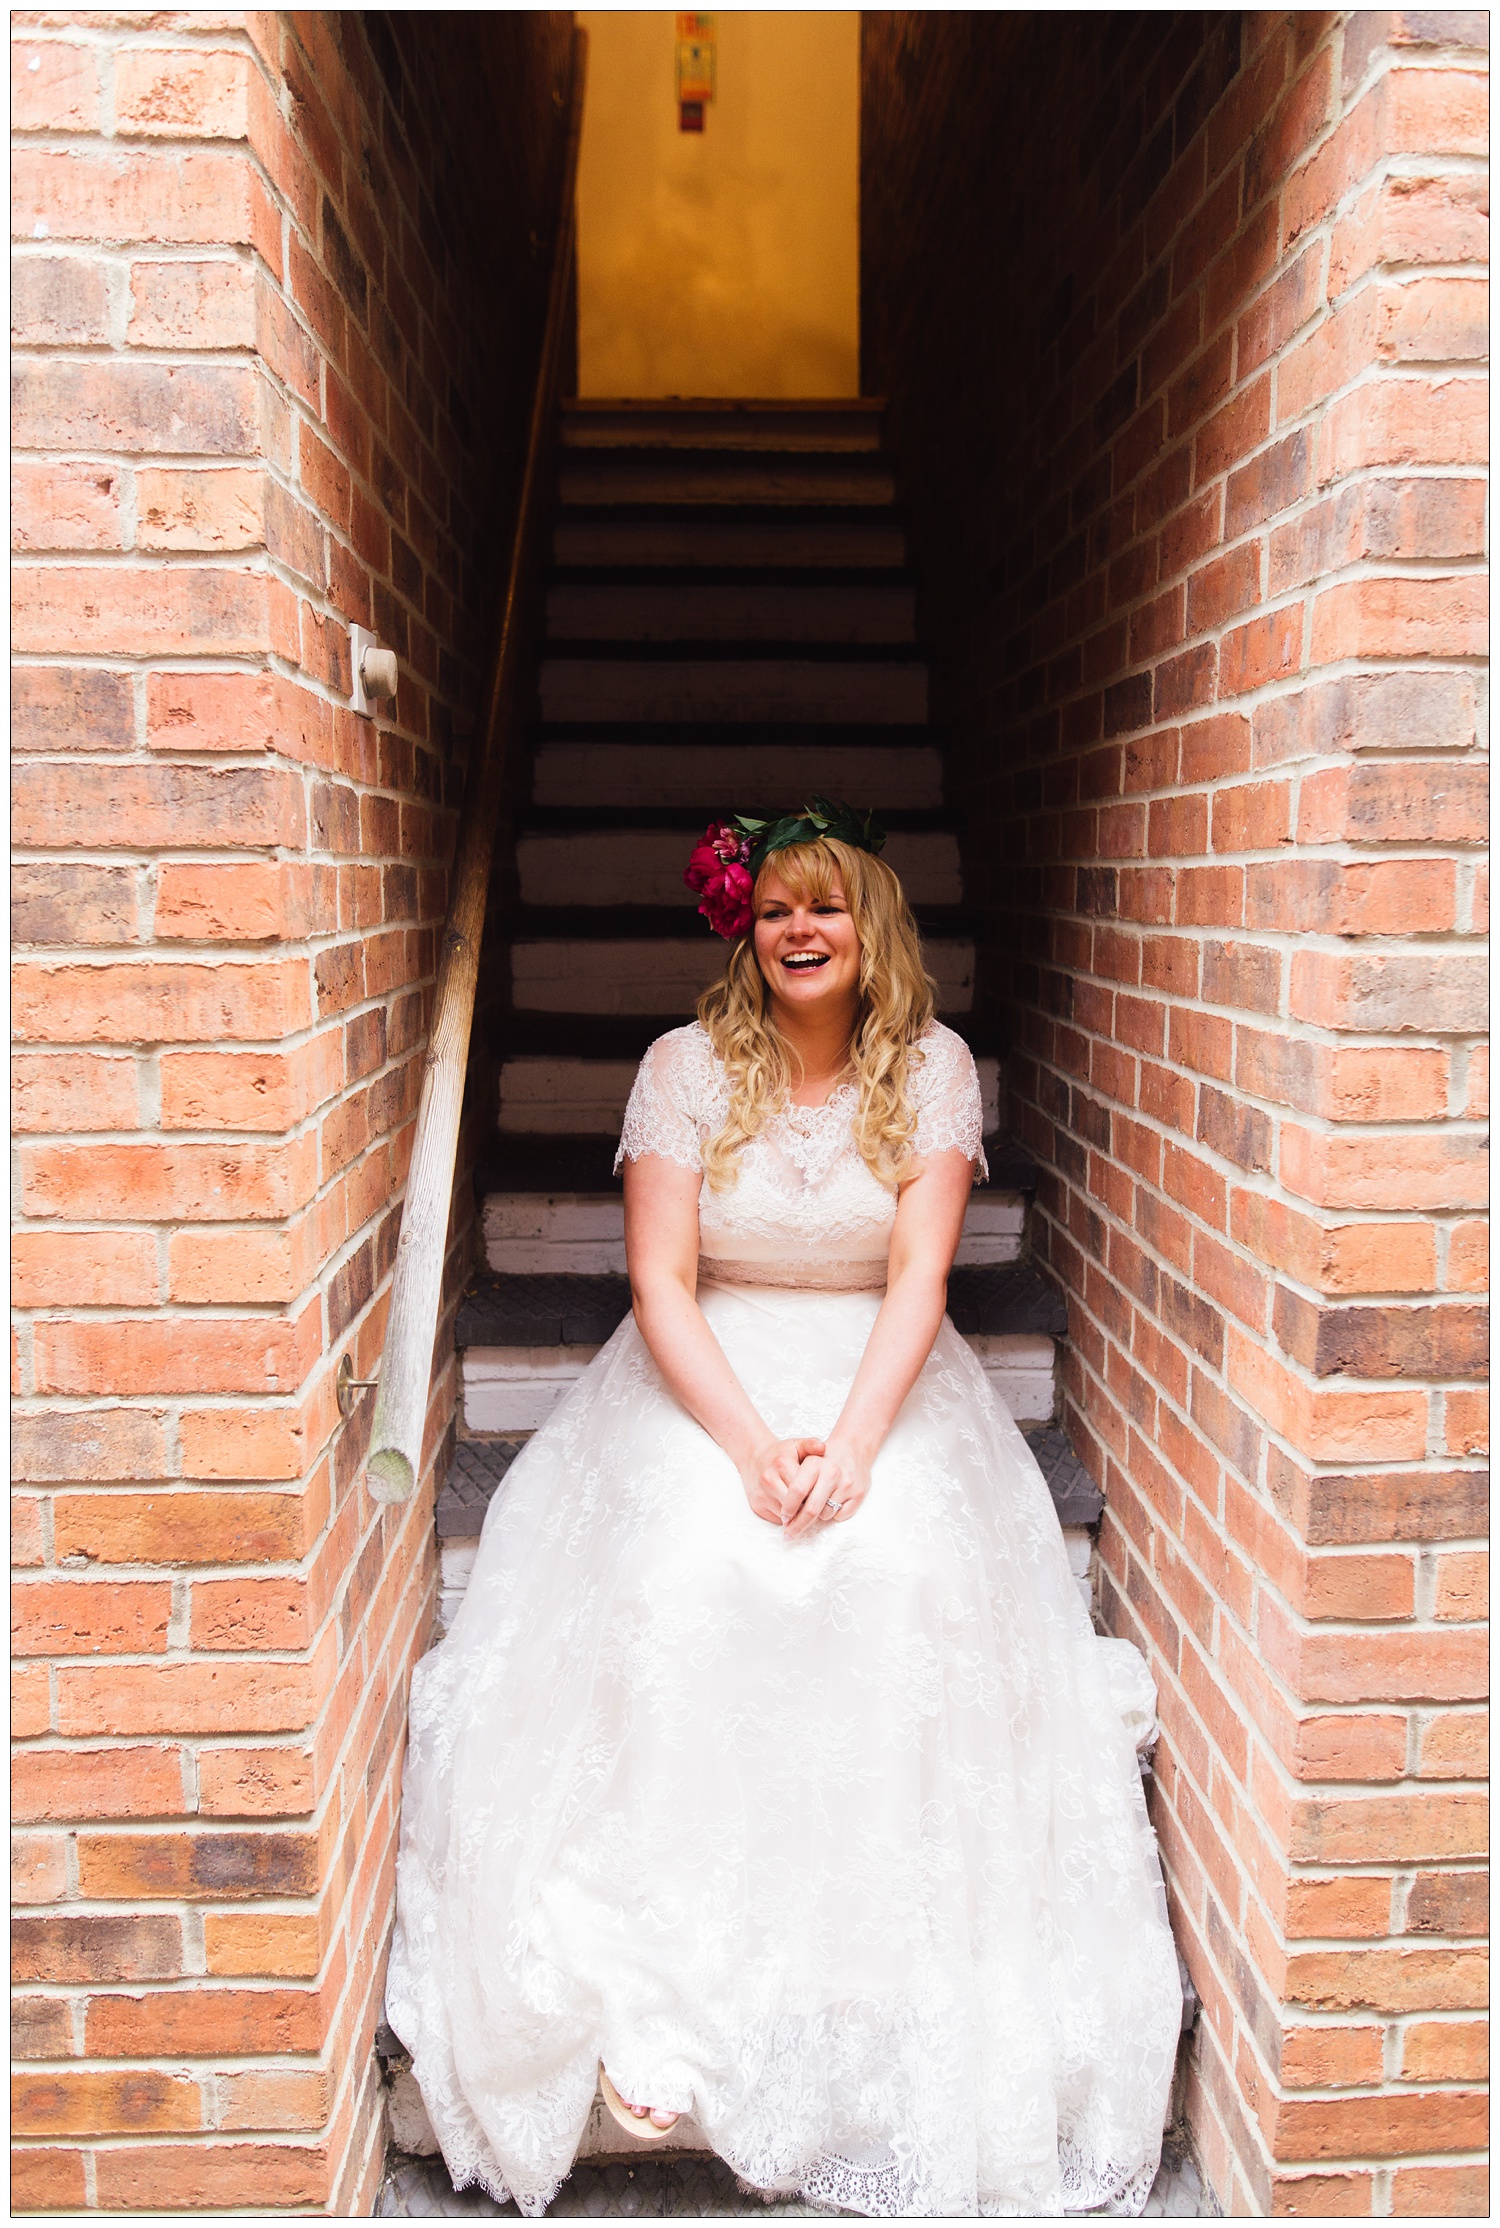 A bride sits on steps with brick walls at the sides. She is laughing and has flowers in her hair. At The Cottage Hotel Ruddington.